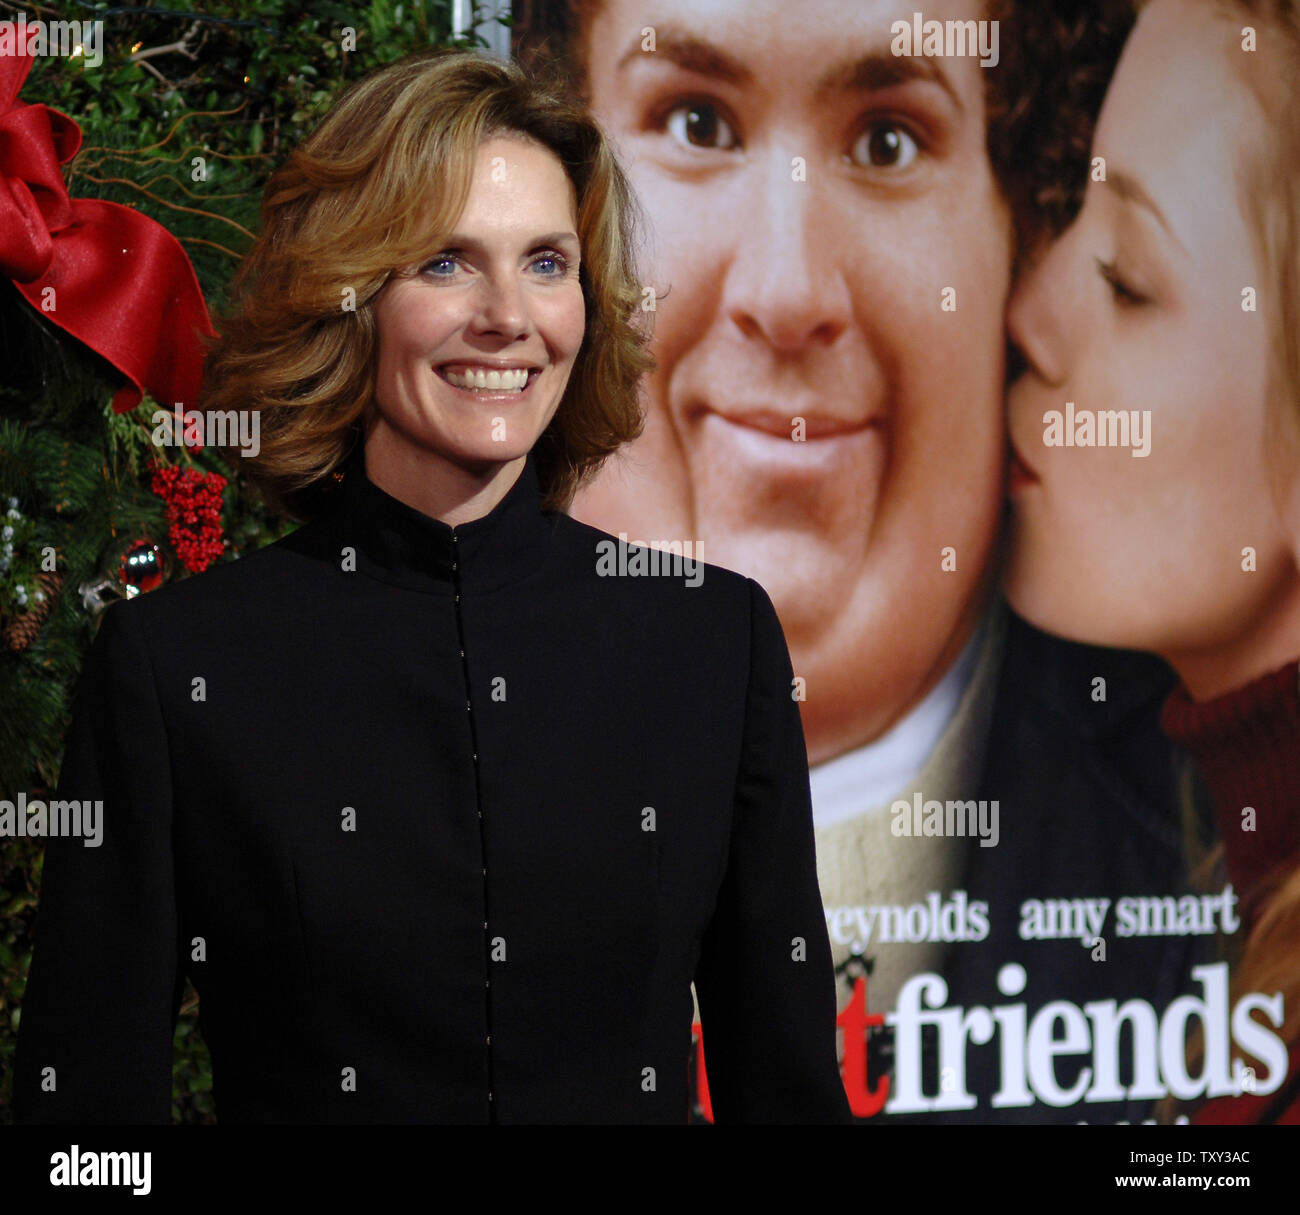 https://c8.alamy.com/comp/TXY3AC/actress-julie-hagerty-a-cast-member-in-the-romantic-comedy-motion-picture-just-friends-arrives-for-the-premiere-of-the-film-in-the-westwood-section-of-los-angeles-november-14-2005-upi-photojim-ruymen-TXY3AC.jpg